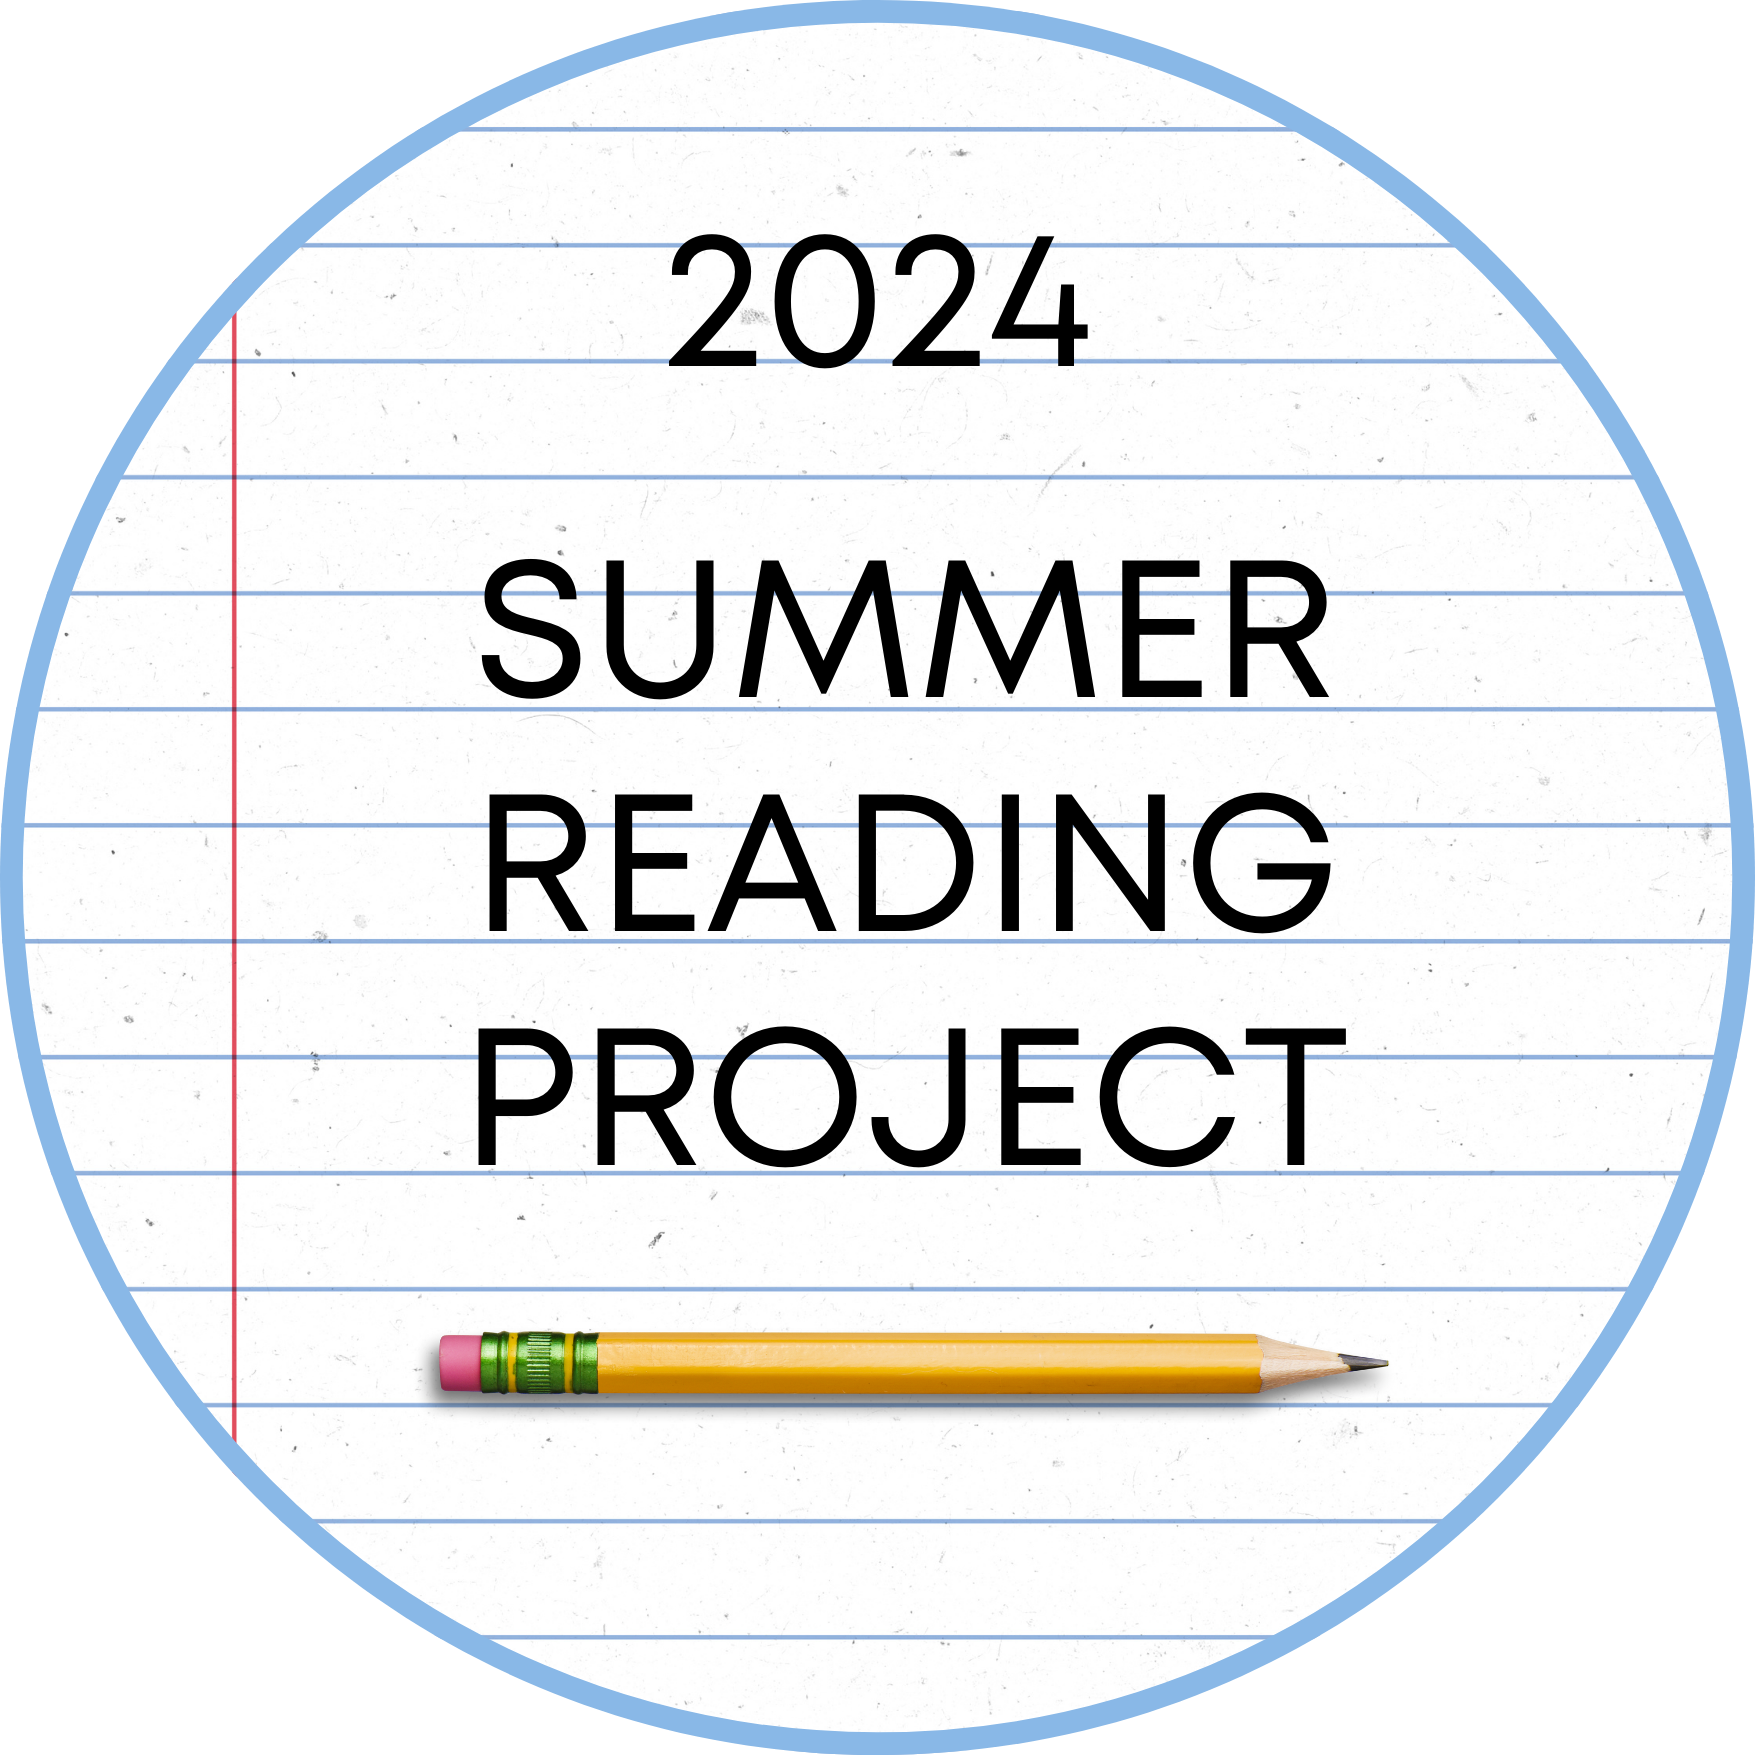 Summer reading packet - please call the school for more information.